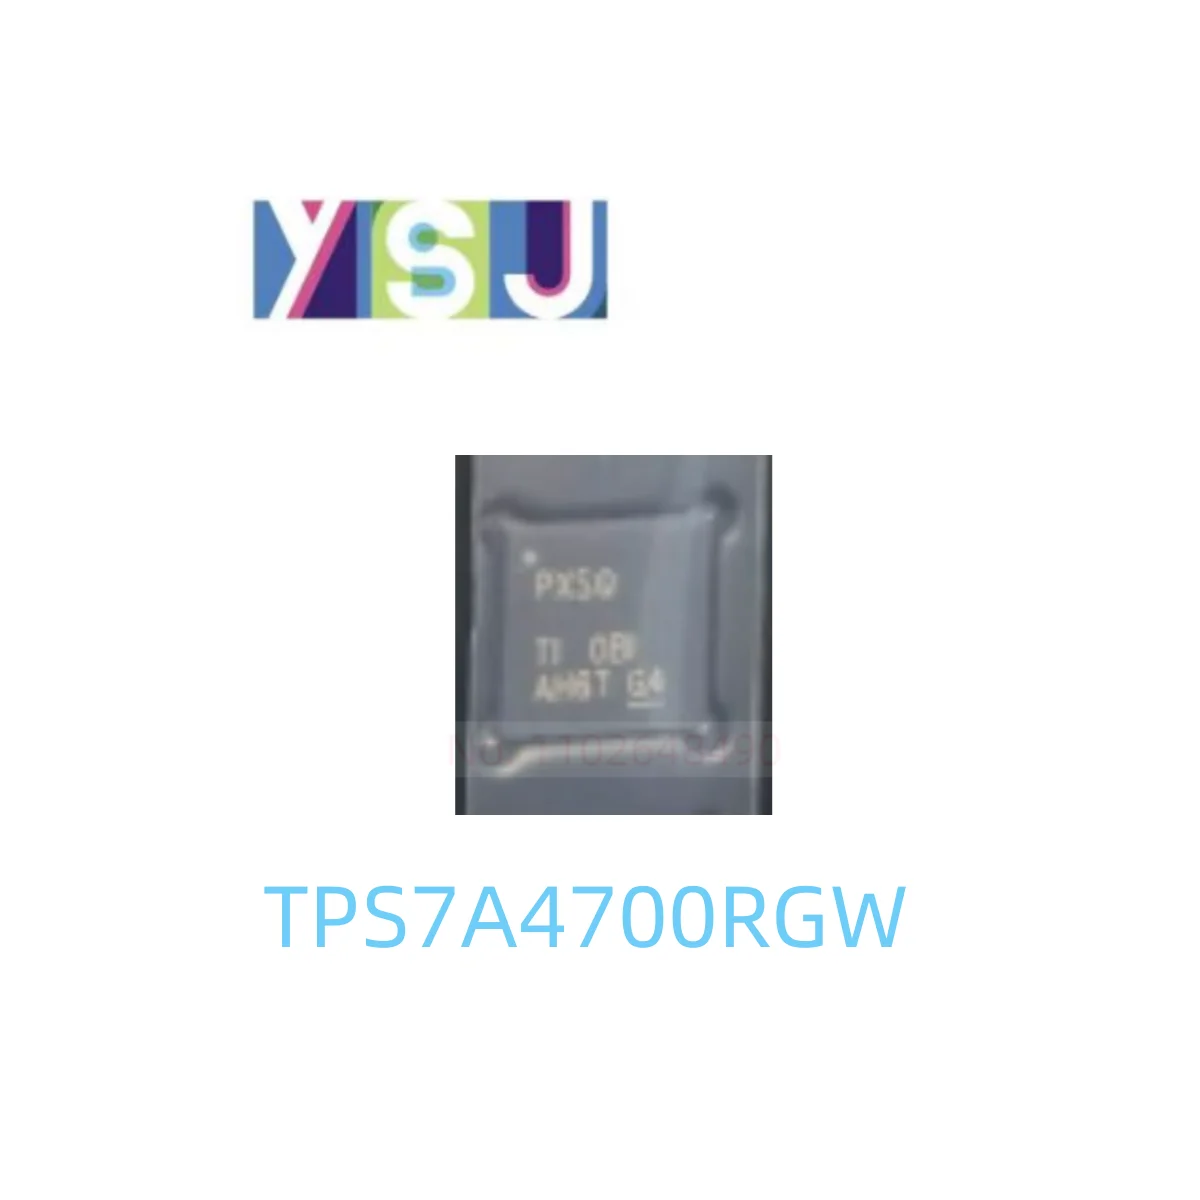 

TPS7A4700RGW IC Brand New Microcontroller EncapsulationQFN-20